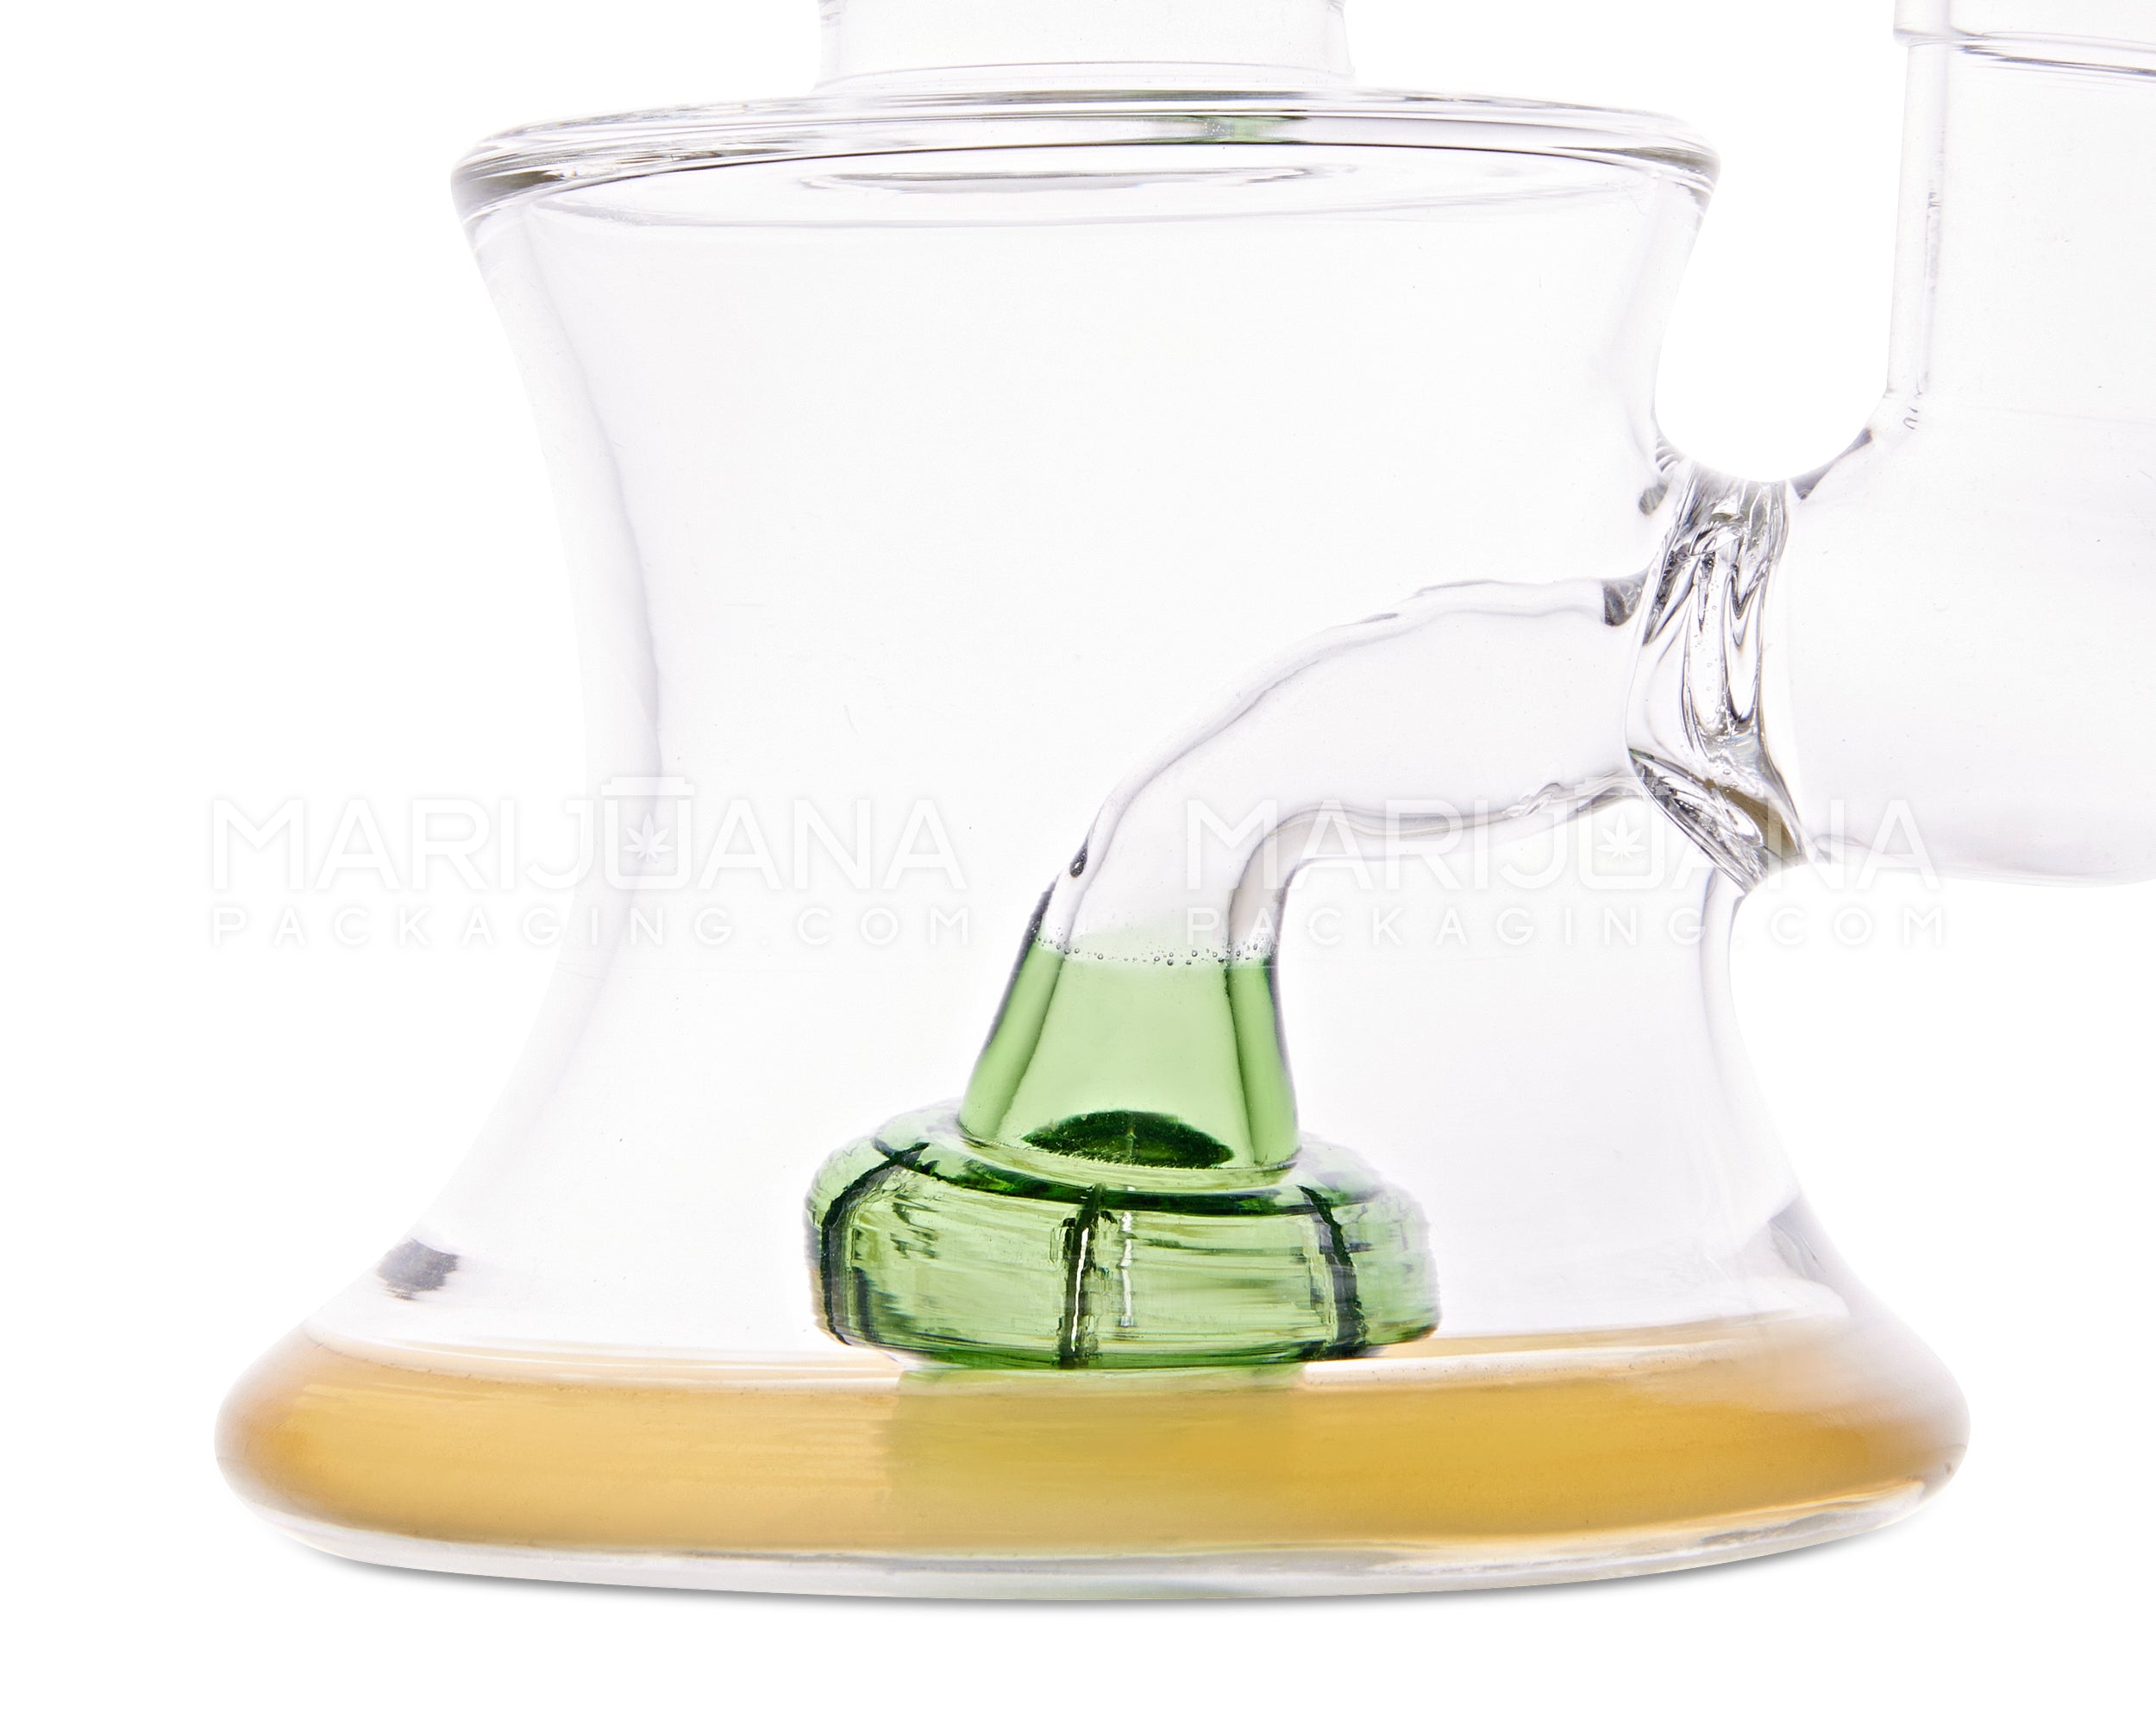 USA Glass | Sidecar Funnel Glass Water Pipe | 6in Tall - 14mm Bowl - Green